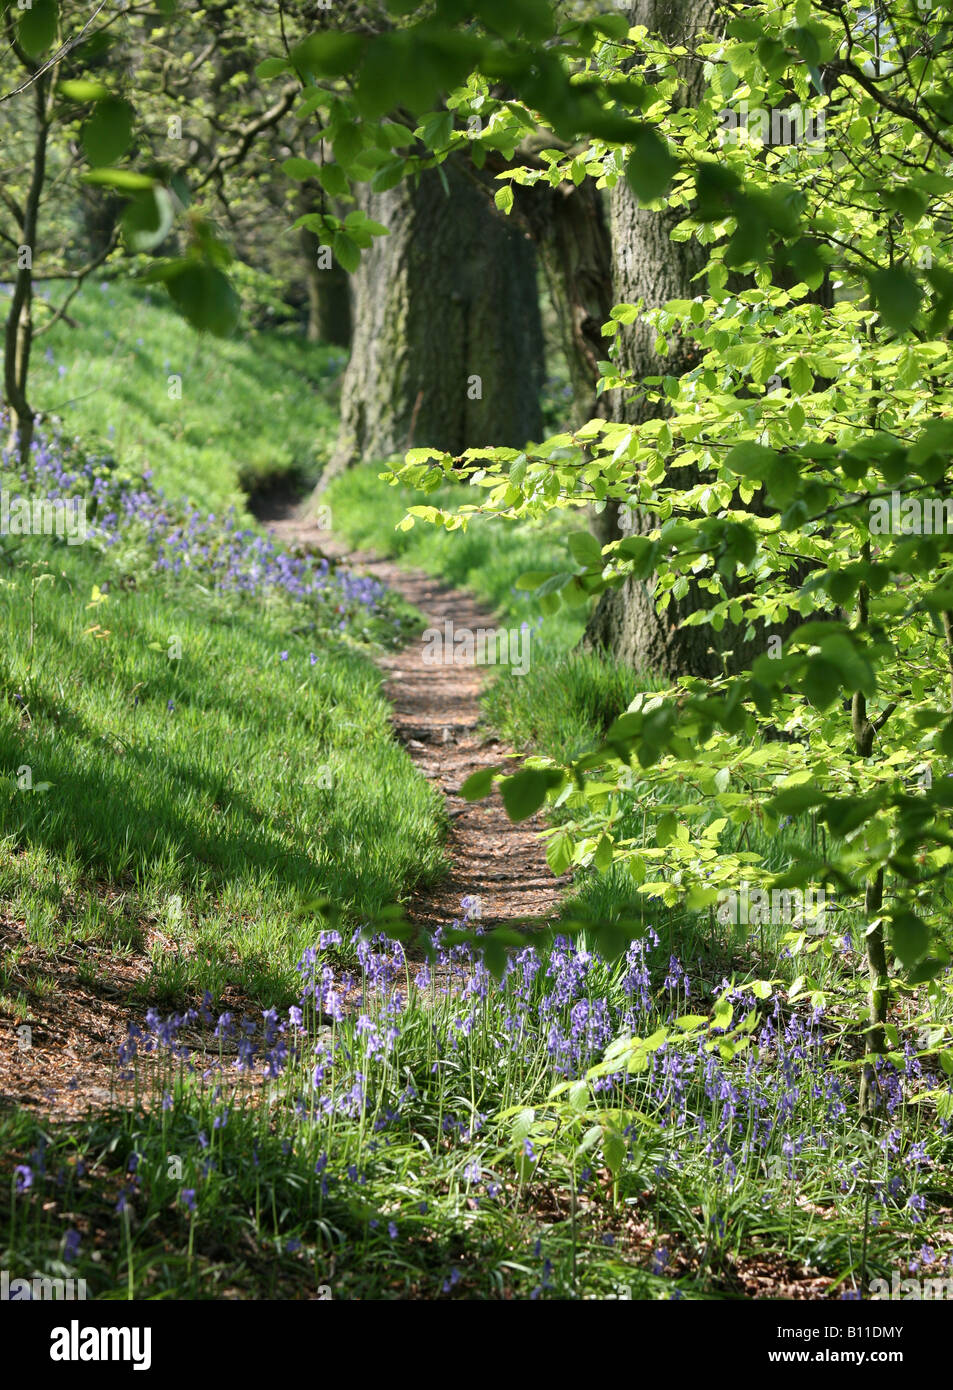 A footpath through an English Bluebell wood in spring time with the leaves on the trees just coming out, England, UK Stock Photo